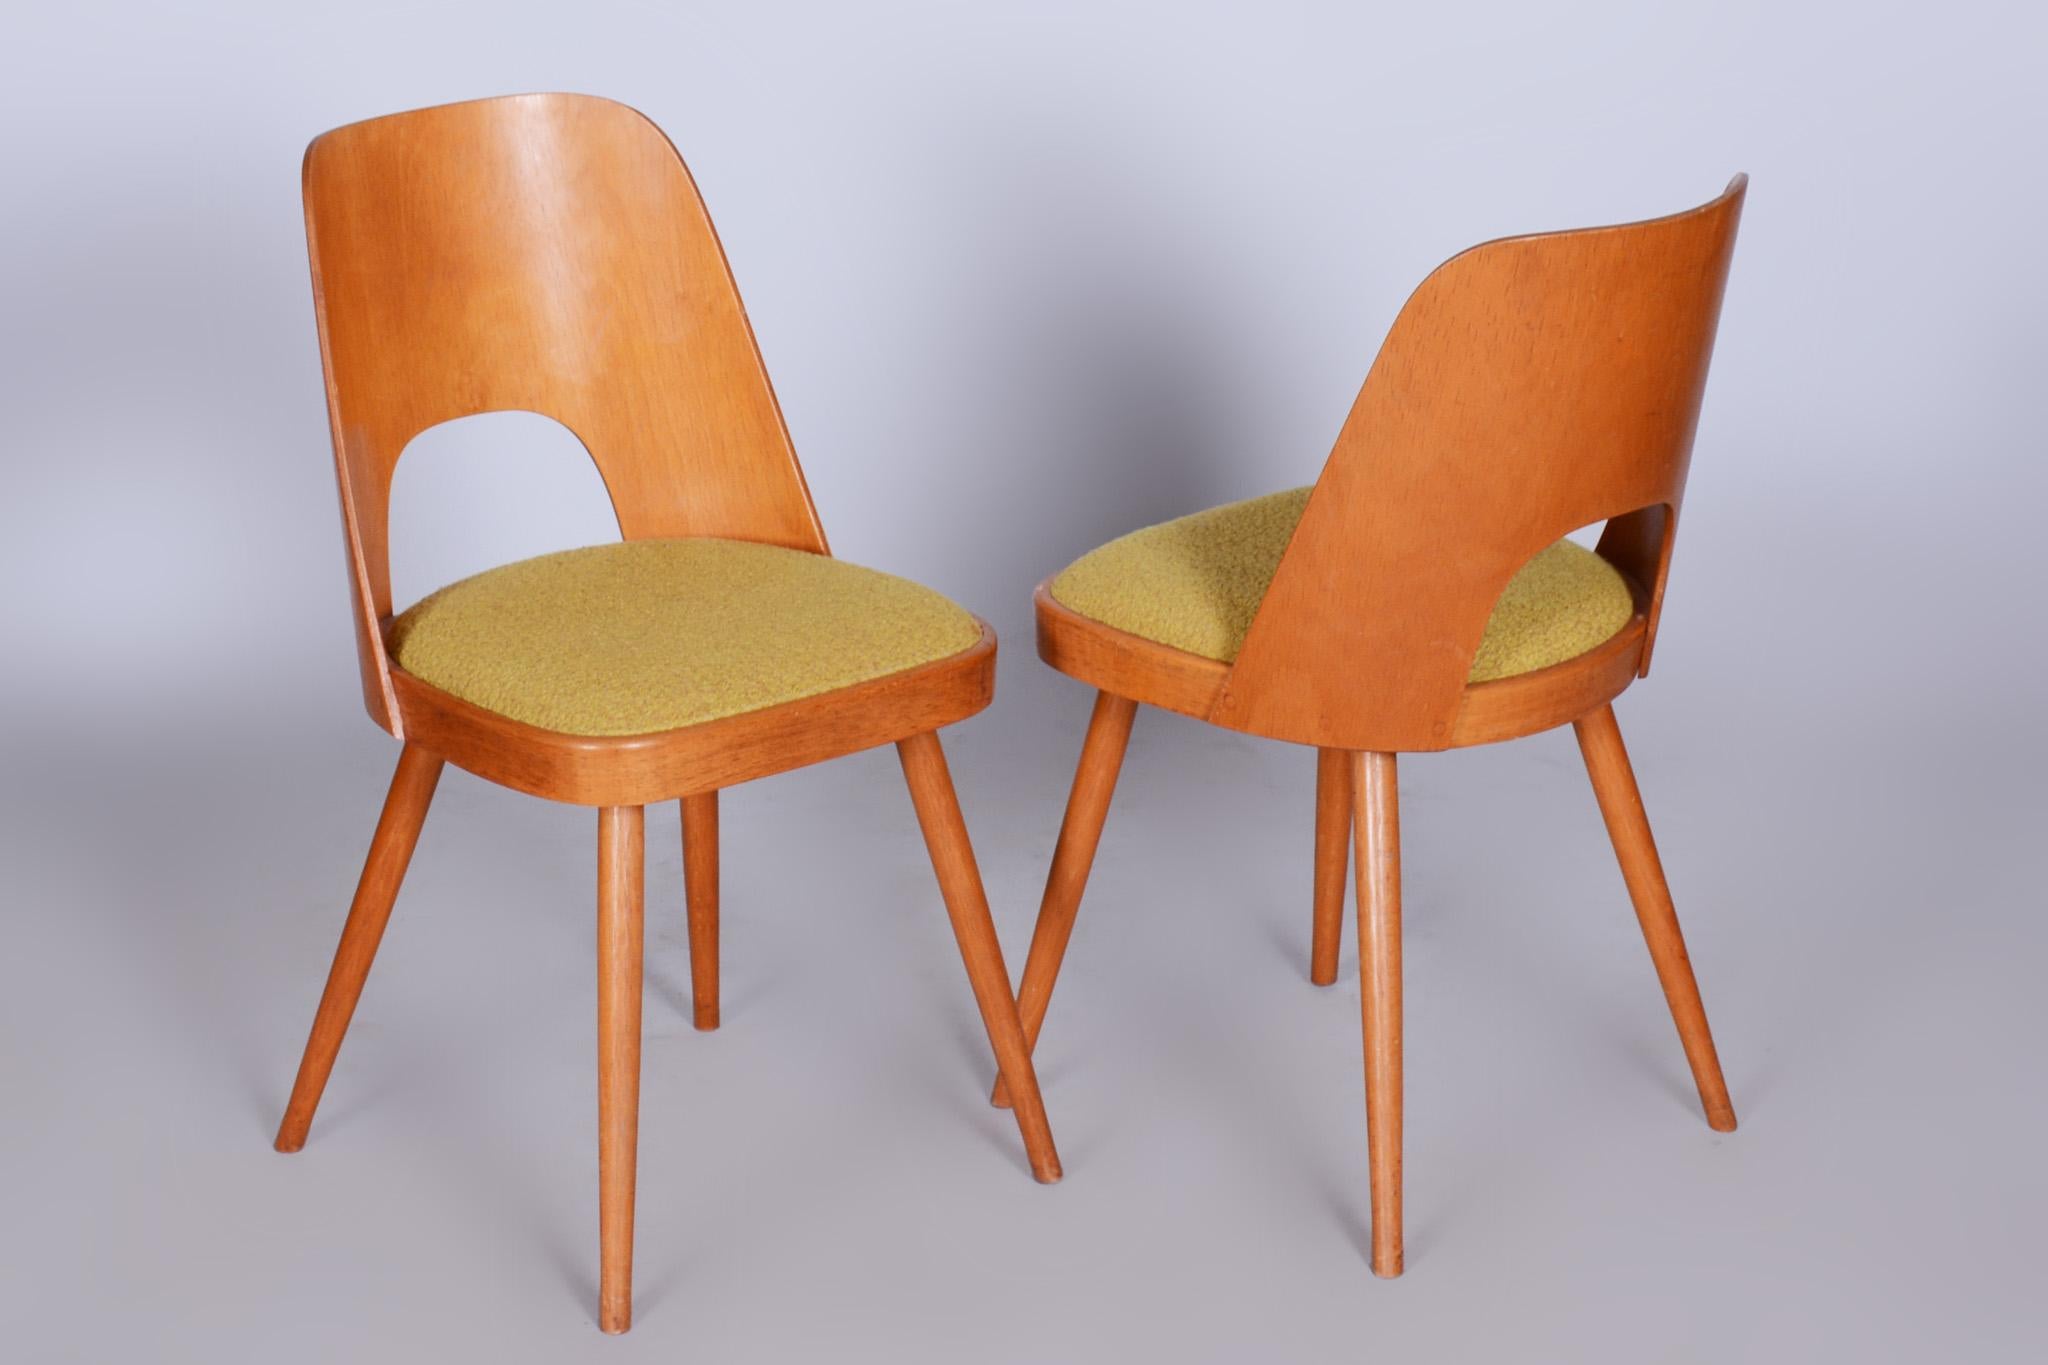 Set of Mid-Century Brown and Yellow Beech Chairs, Oswald Haerdtl, 1950s, Czechia For Sale 3